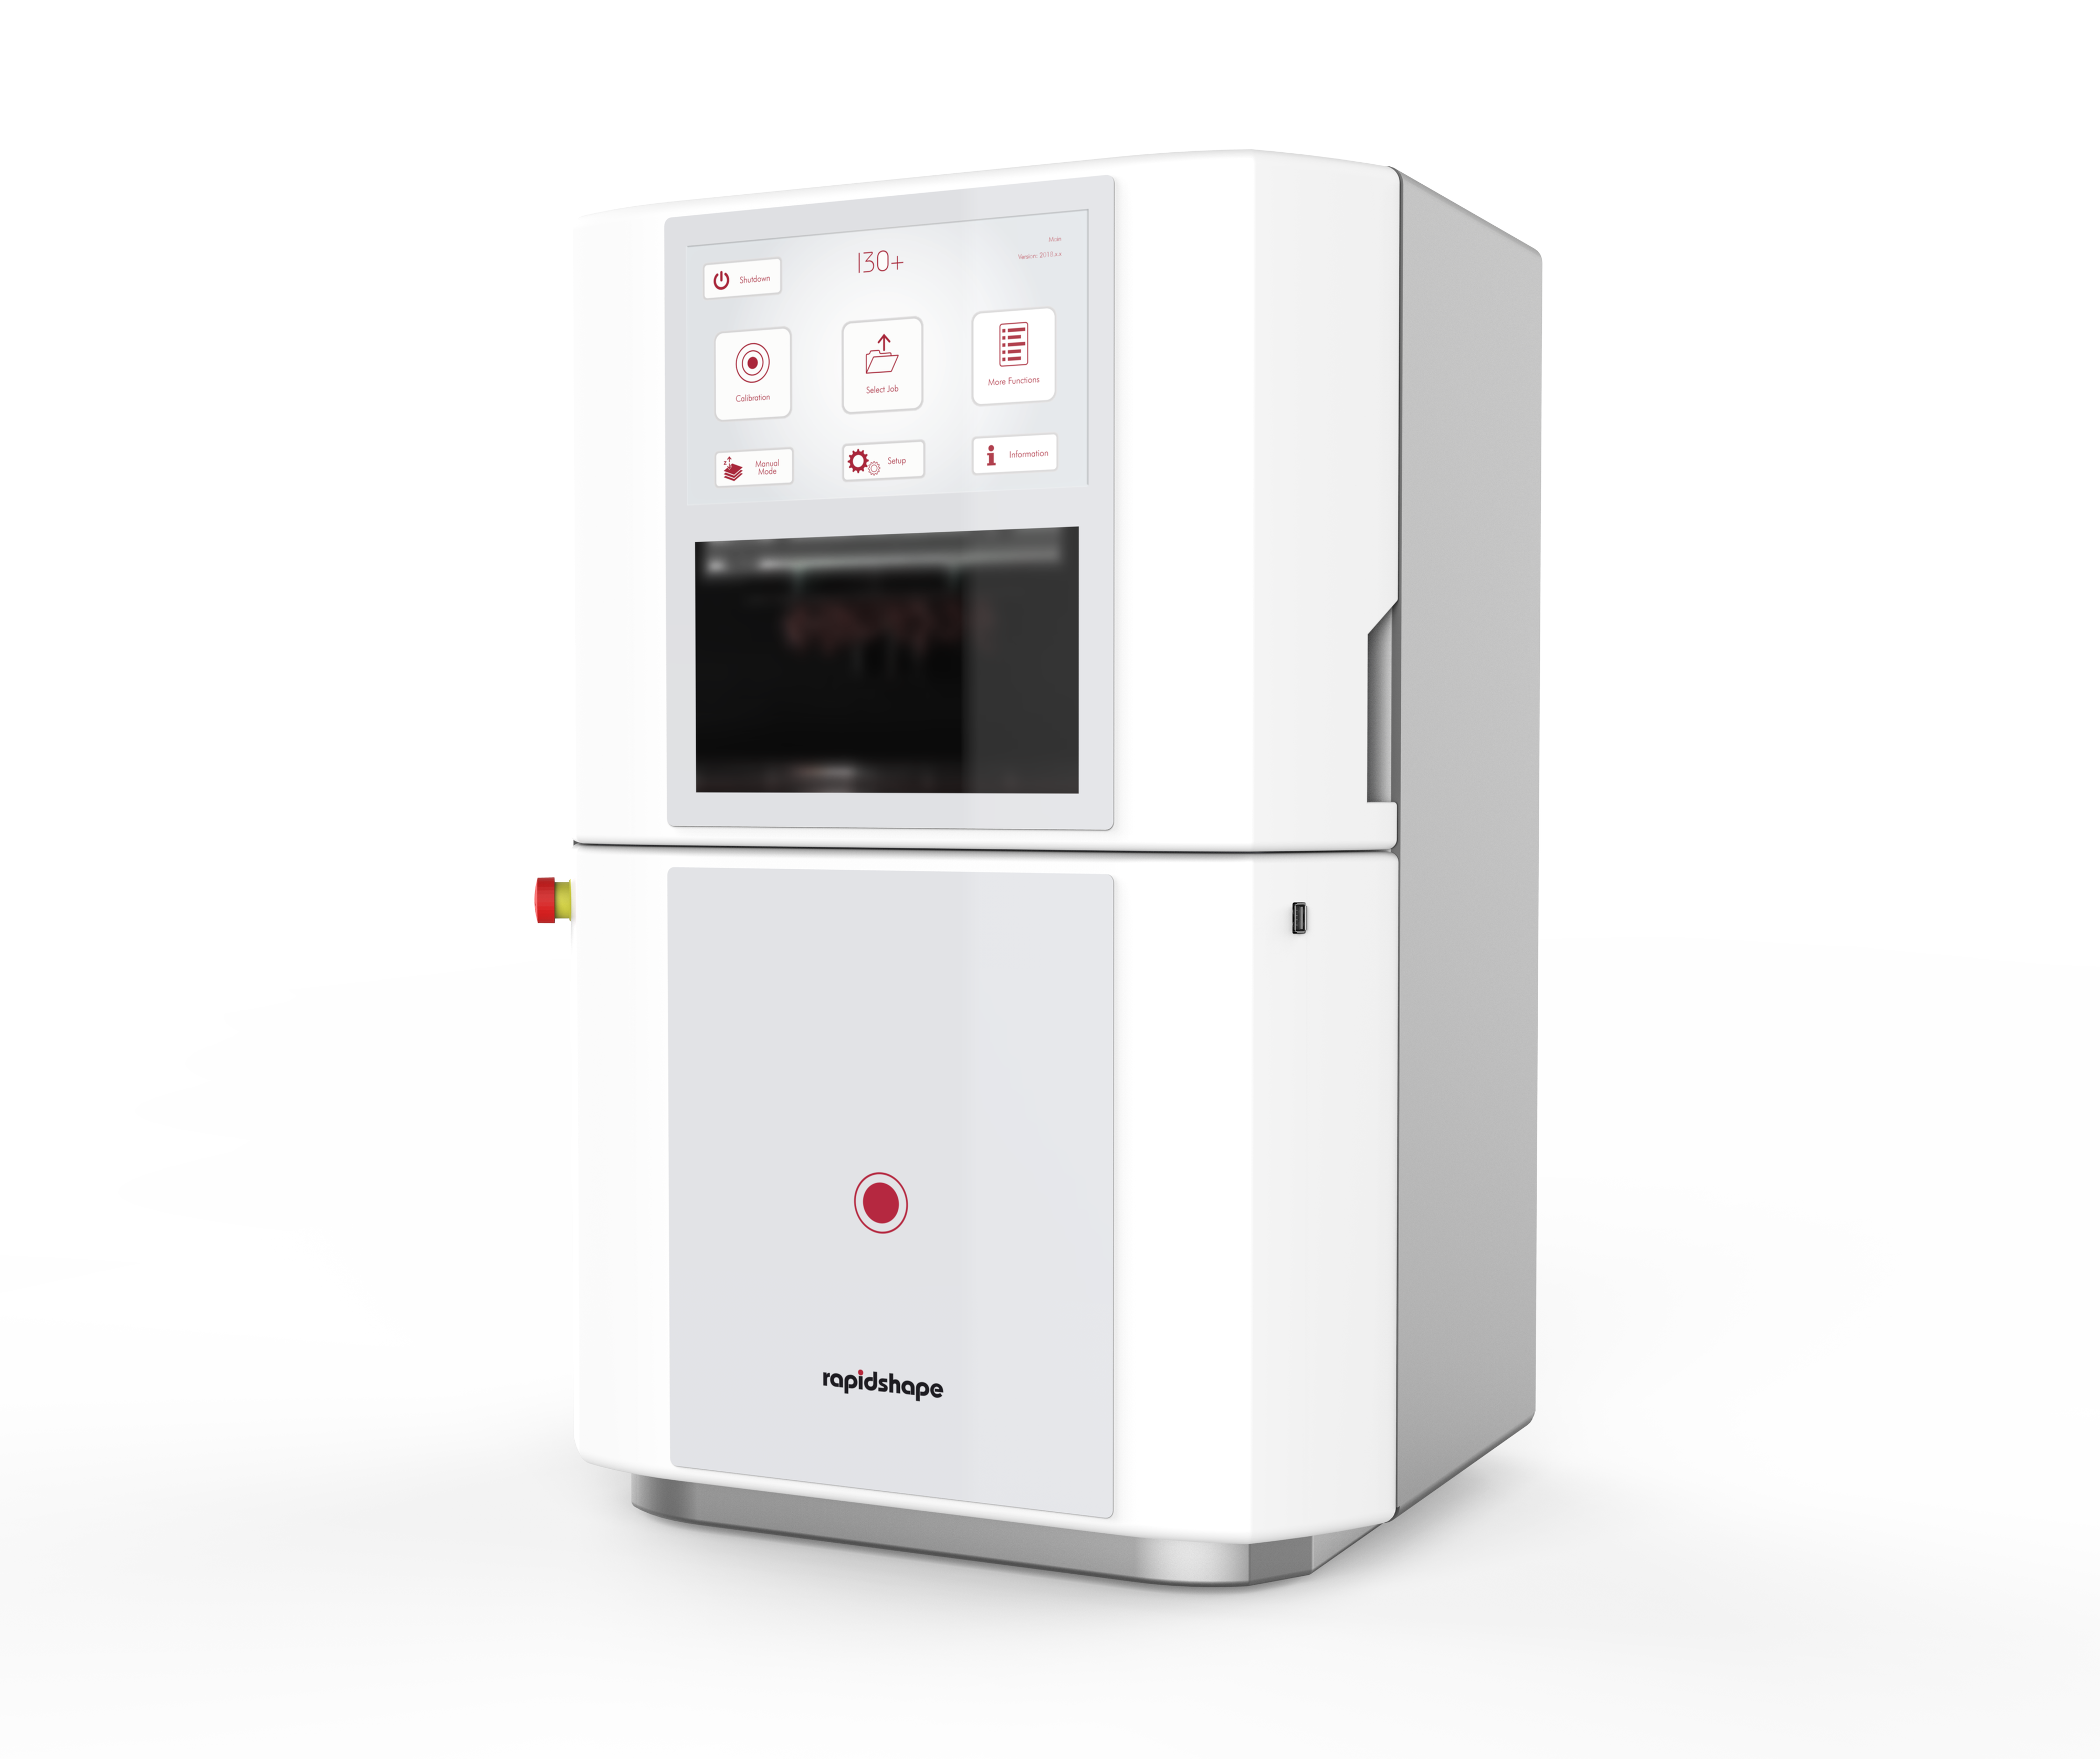 Rapid Shape will certify Henkel´s materials for use on its open DLP printer systems like the I30+.. Photo via Henkel.